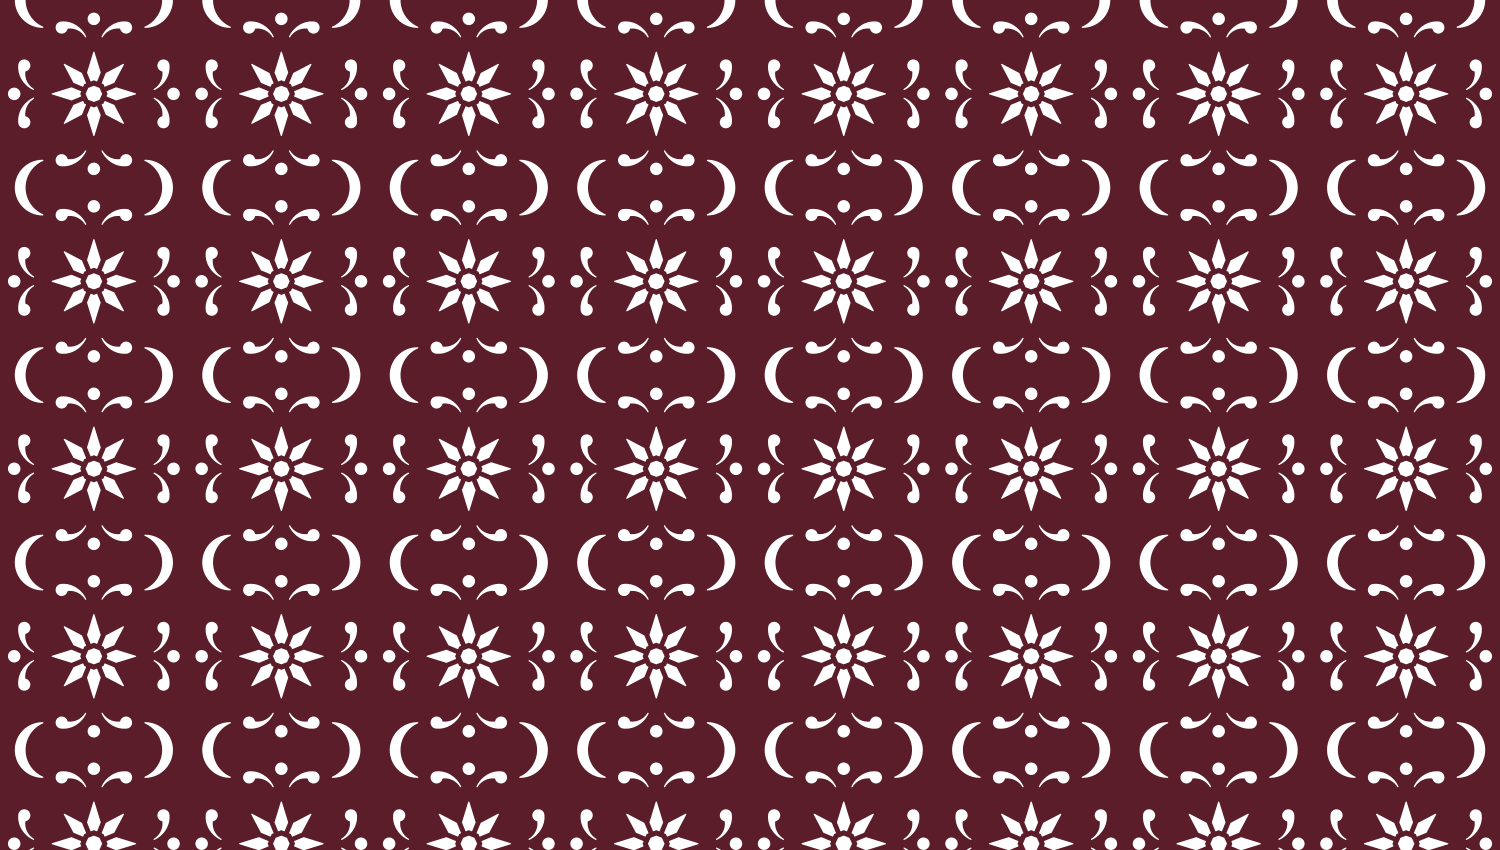 Parasoleil™ Mission© pattern displayed with a burgundy color overlay